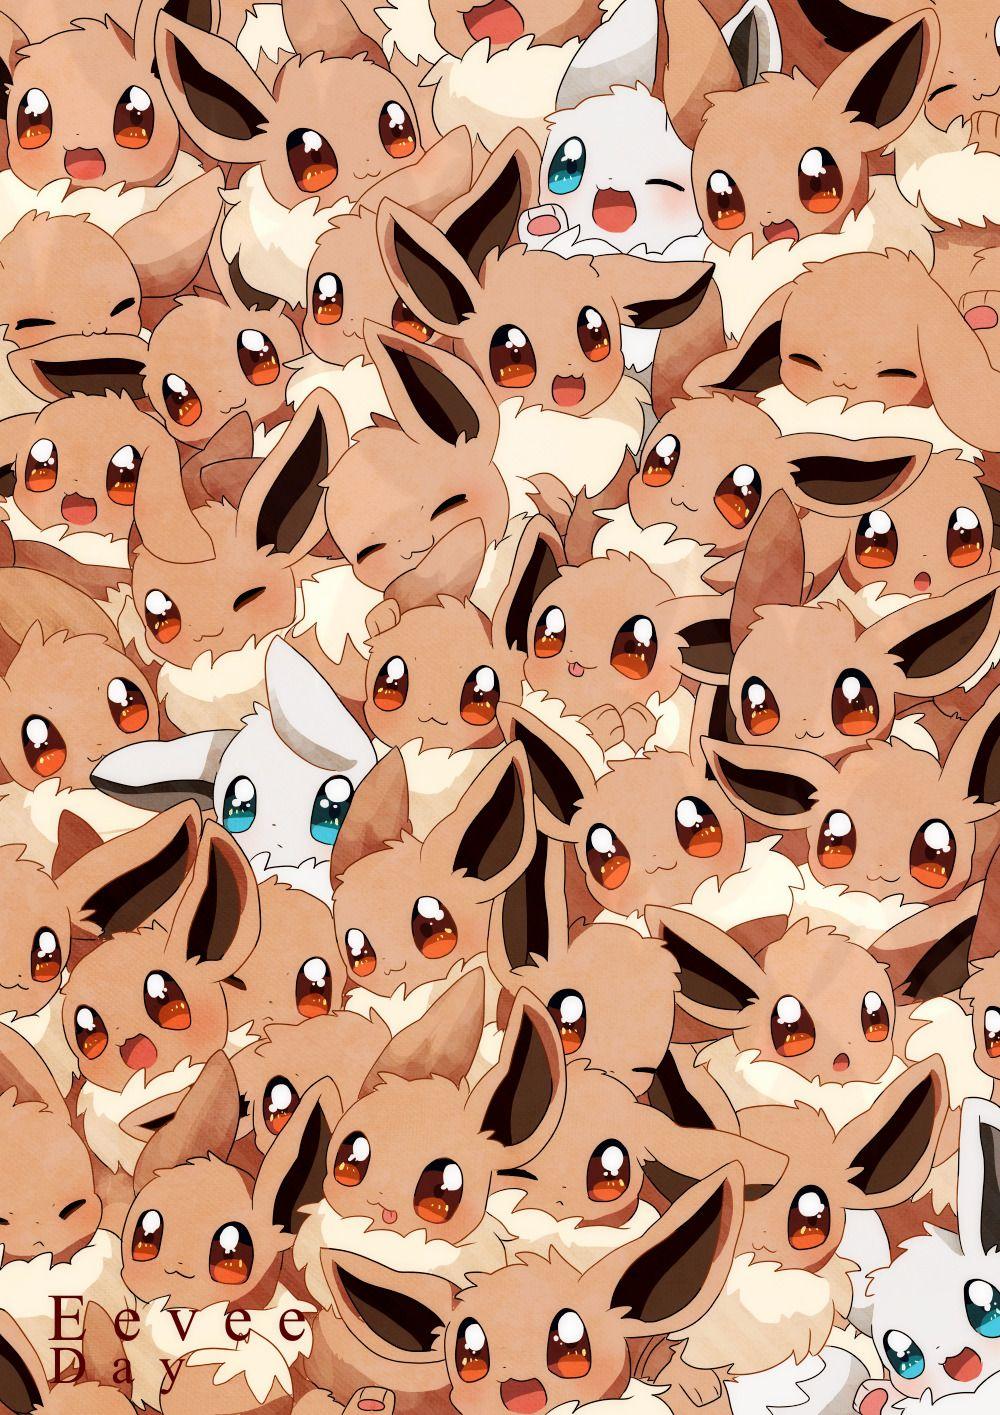 Eevee Day. Let's see. theres some #ShinyEevee and some